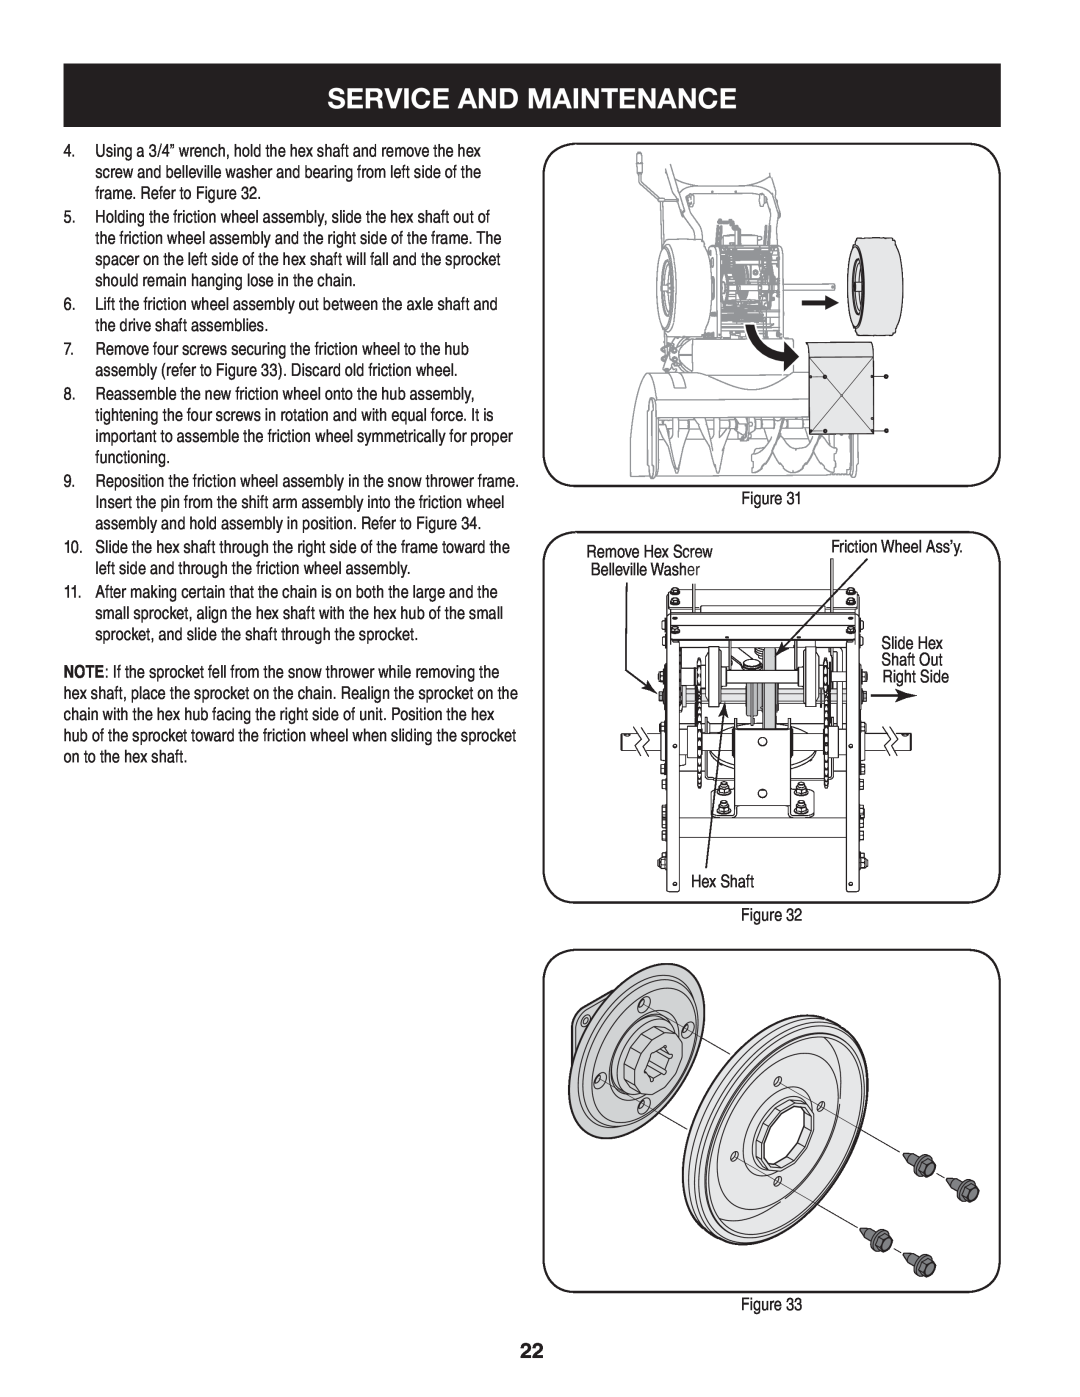 Craftsman 247.88845 manual Service And Maintenance, Remove Hex Screw Belleville Washer 